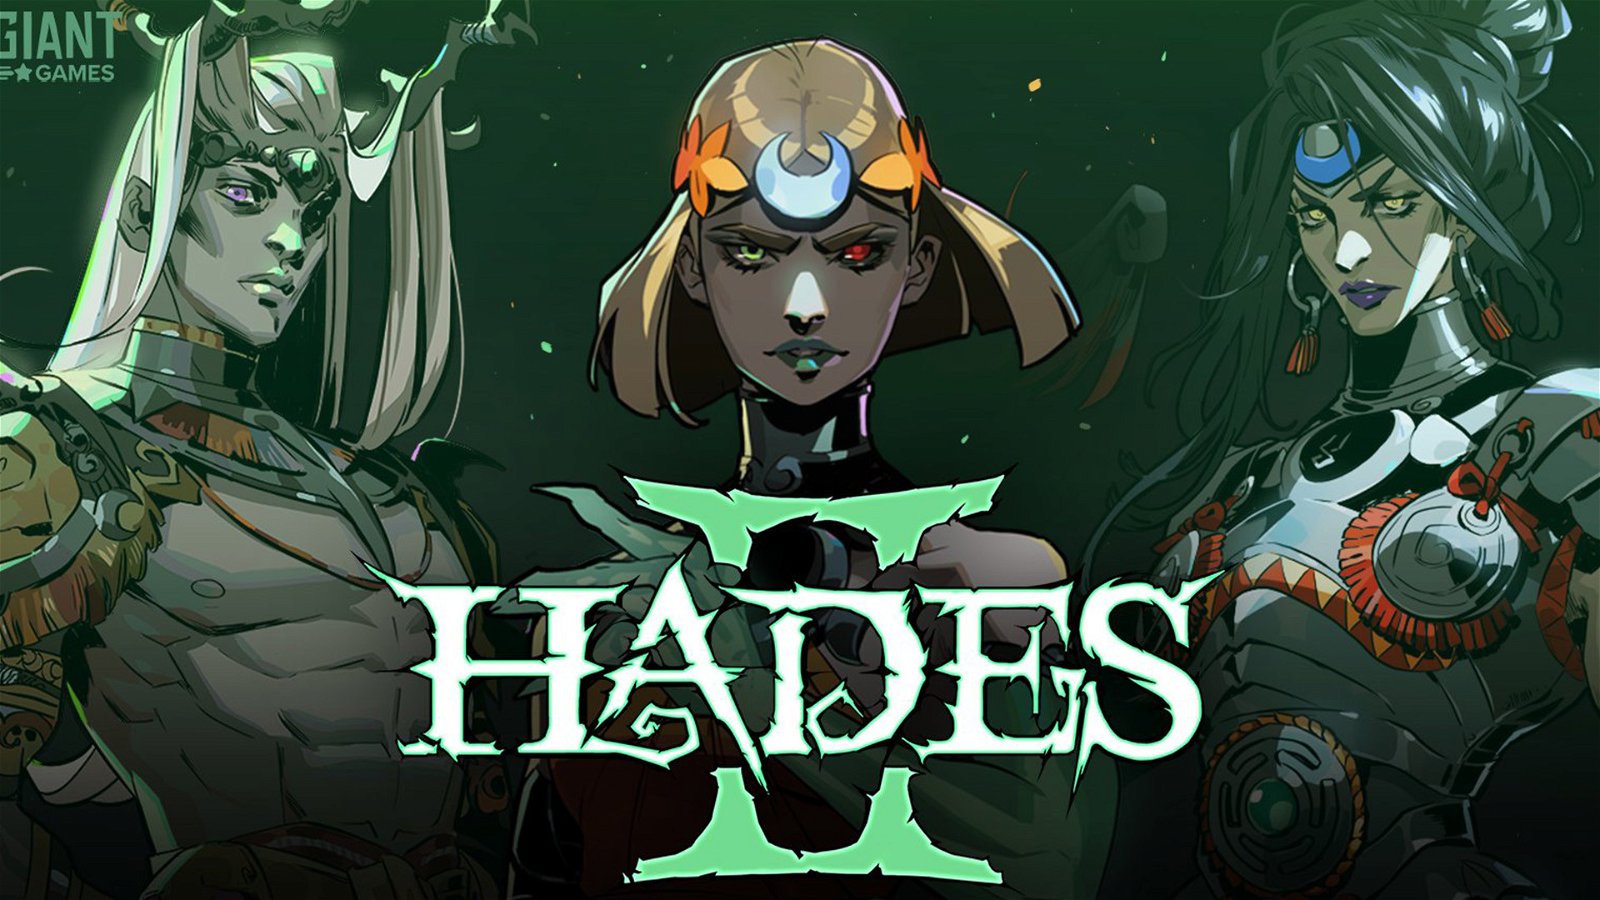 Does Hades 2 run on your PC? Here are the requirements